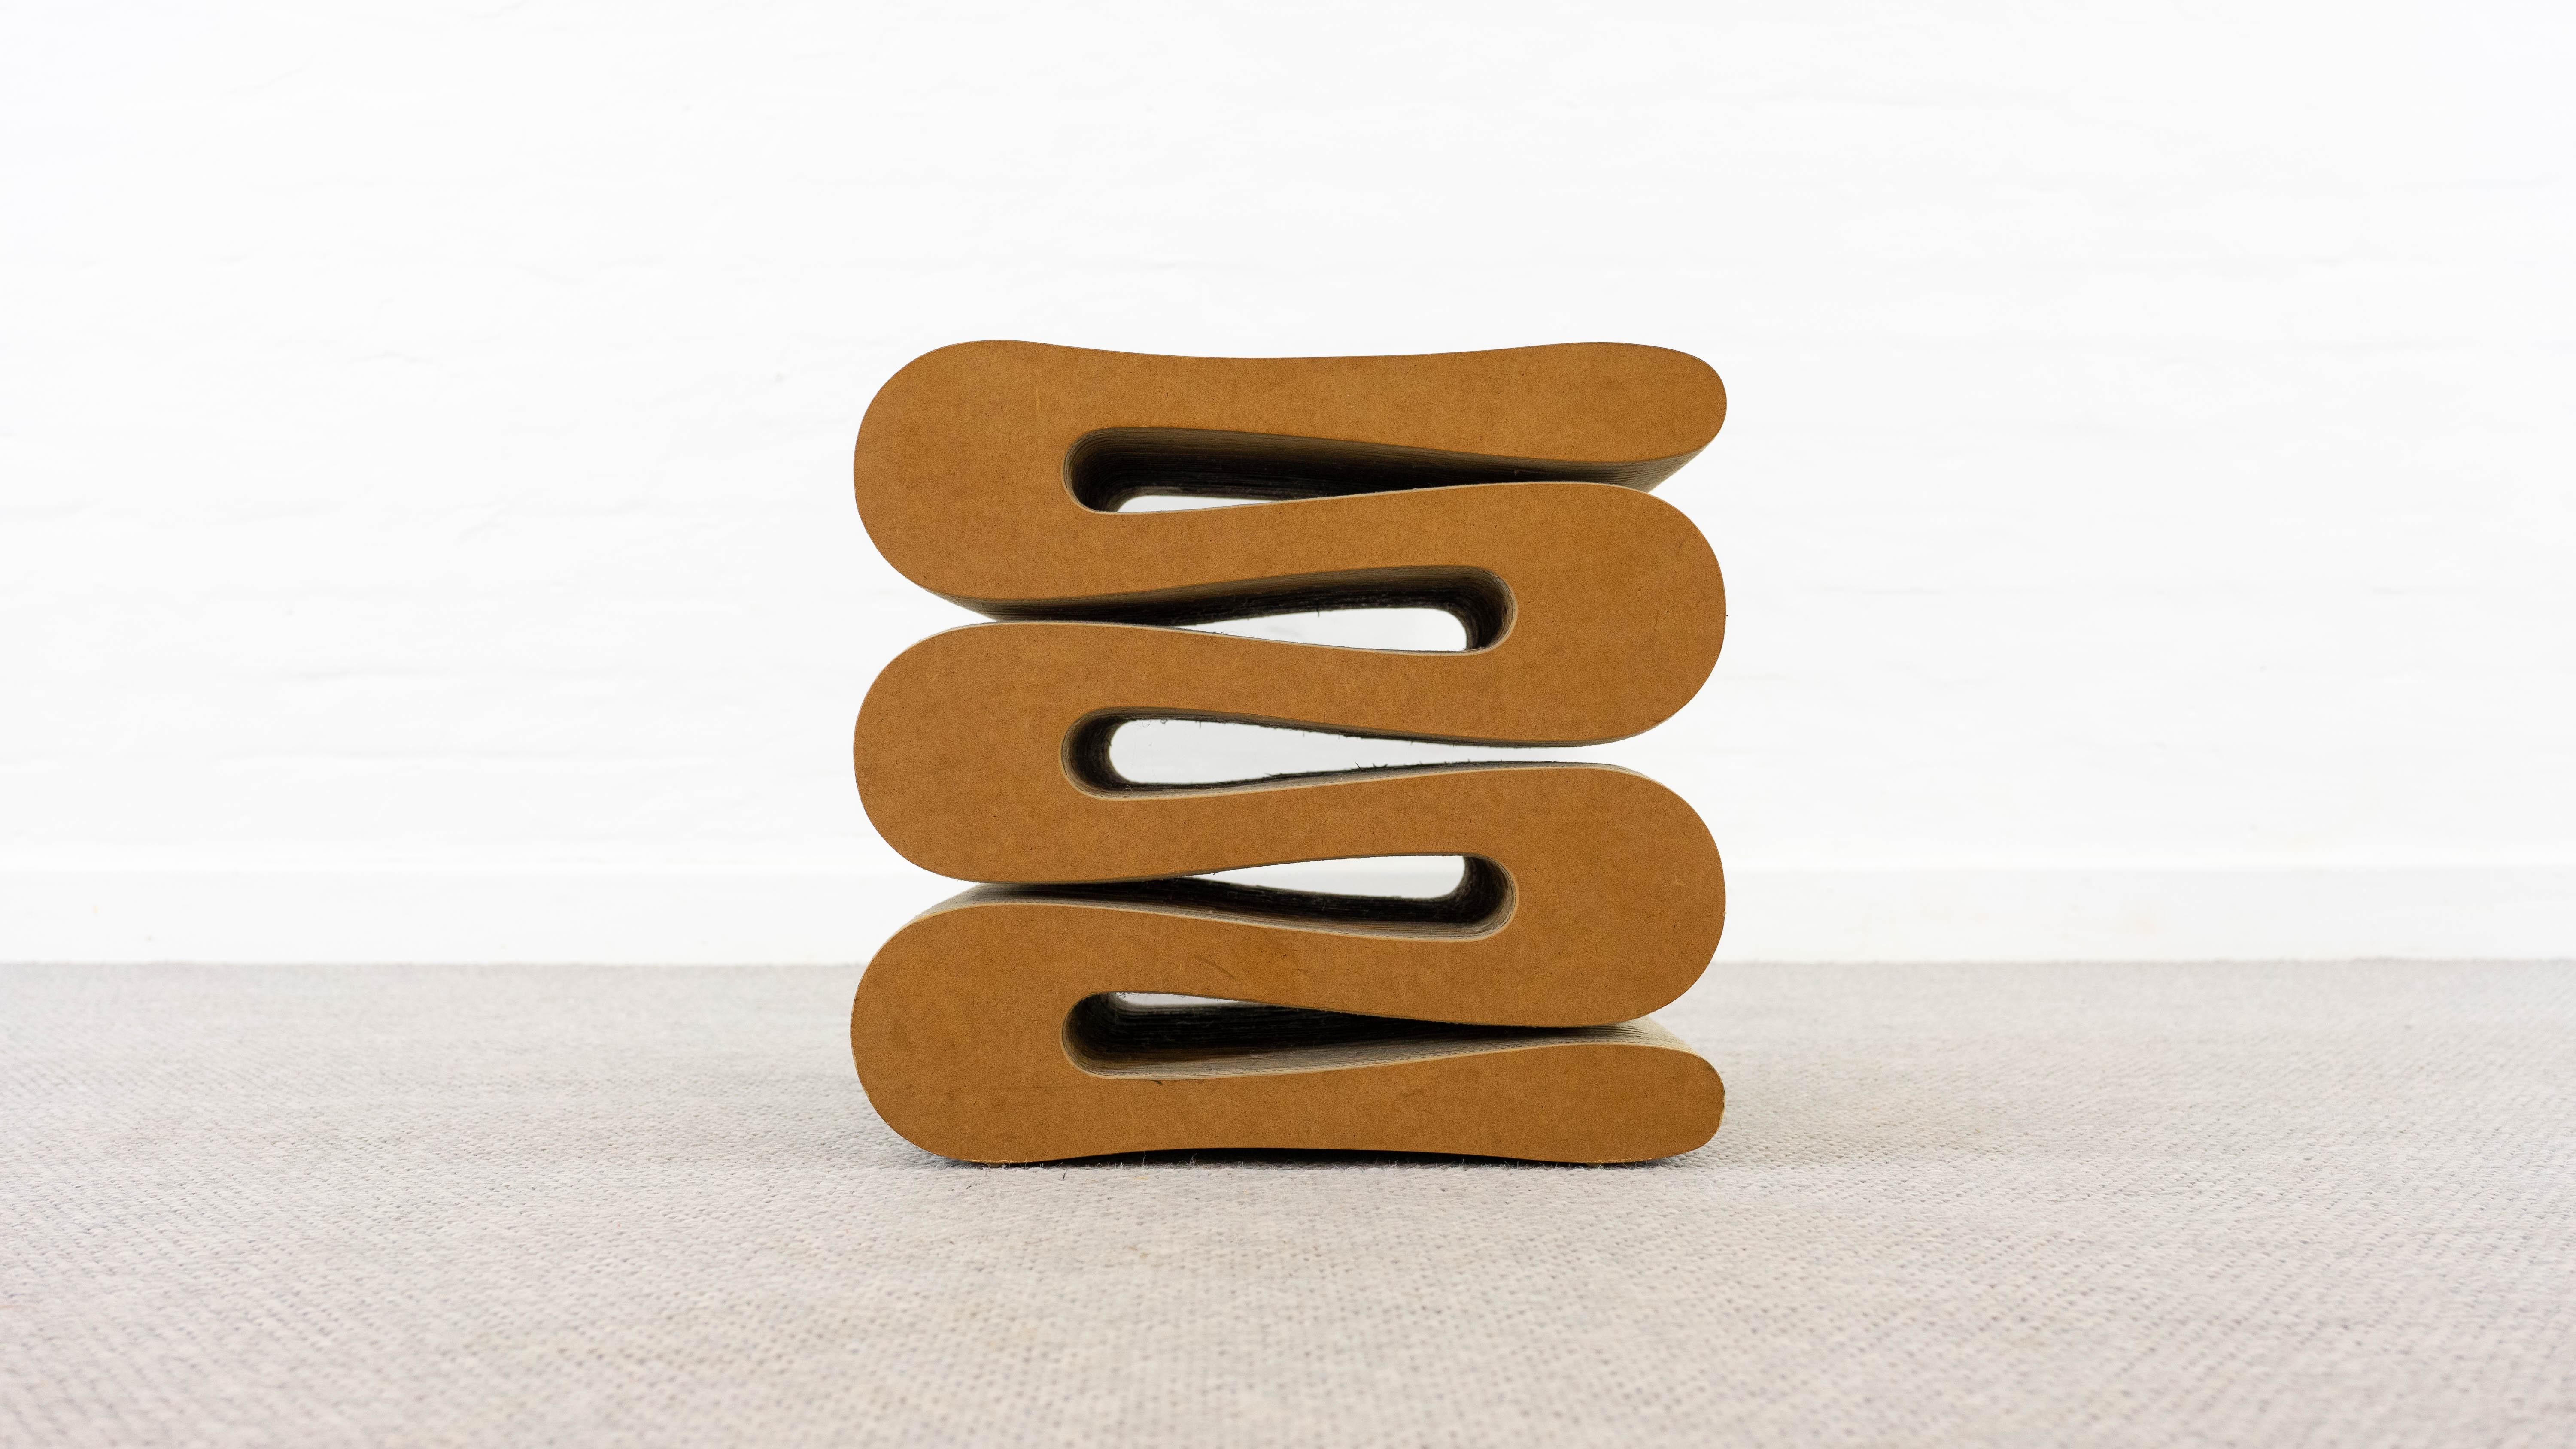 Vintage Wiggle stool by famous architect Frank O. Gehry. Manufactured by Vitra. The piece is made of corrugated cardboard and hardboard to the edges. Labelled on downside. The other stool and wiggle chair which are shown are not part of this offer.